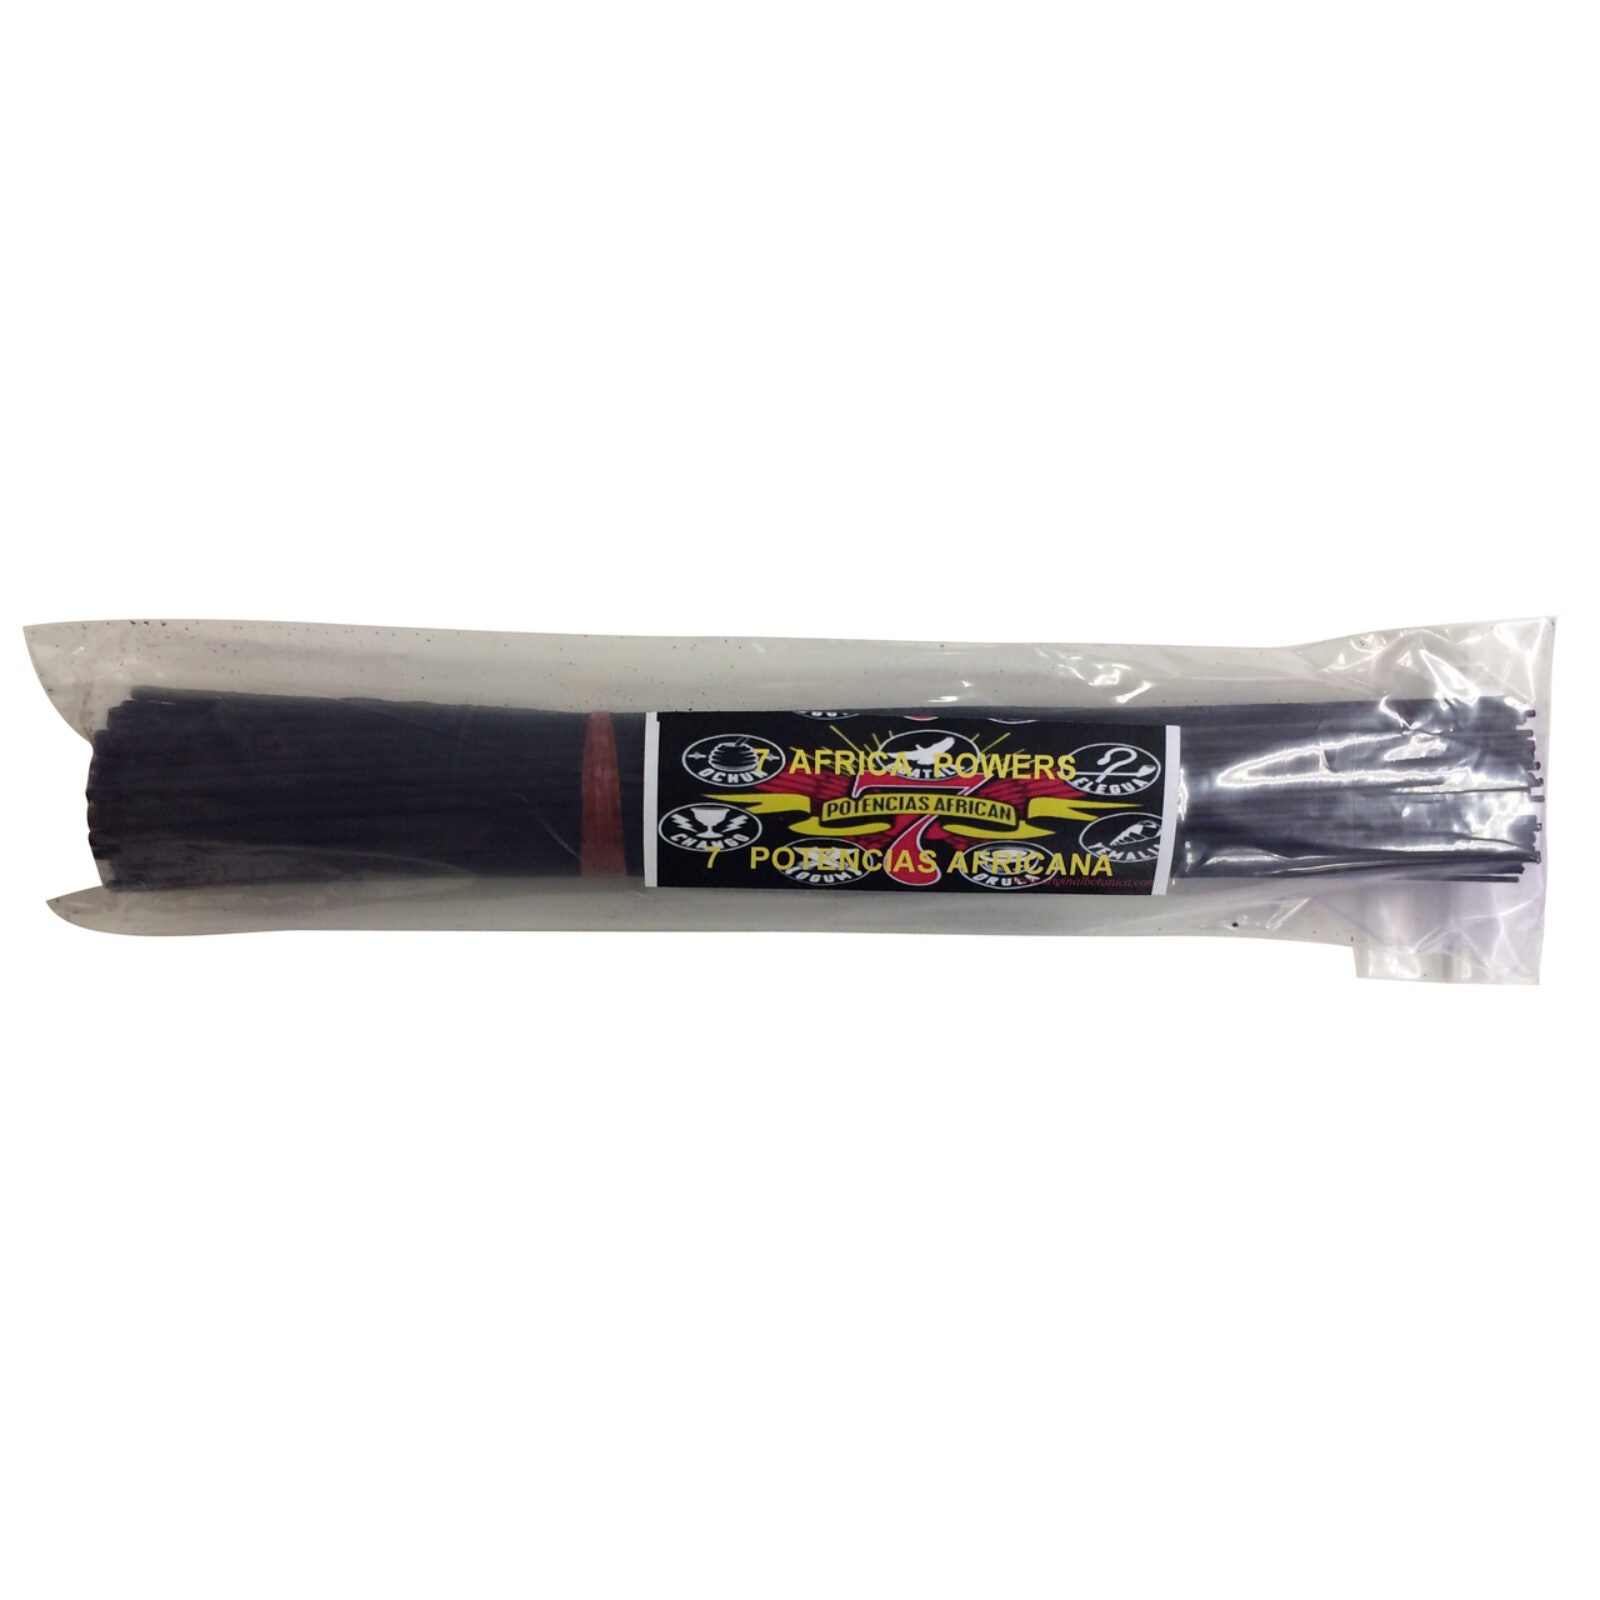 7 African Powers Incense Stick 10 1/2"